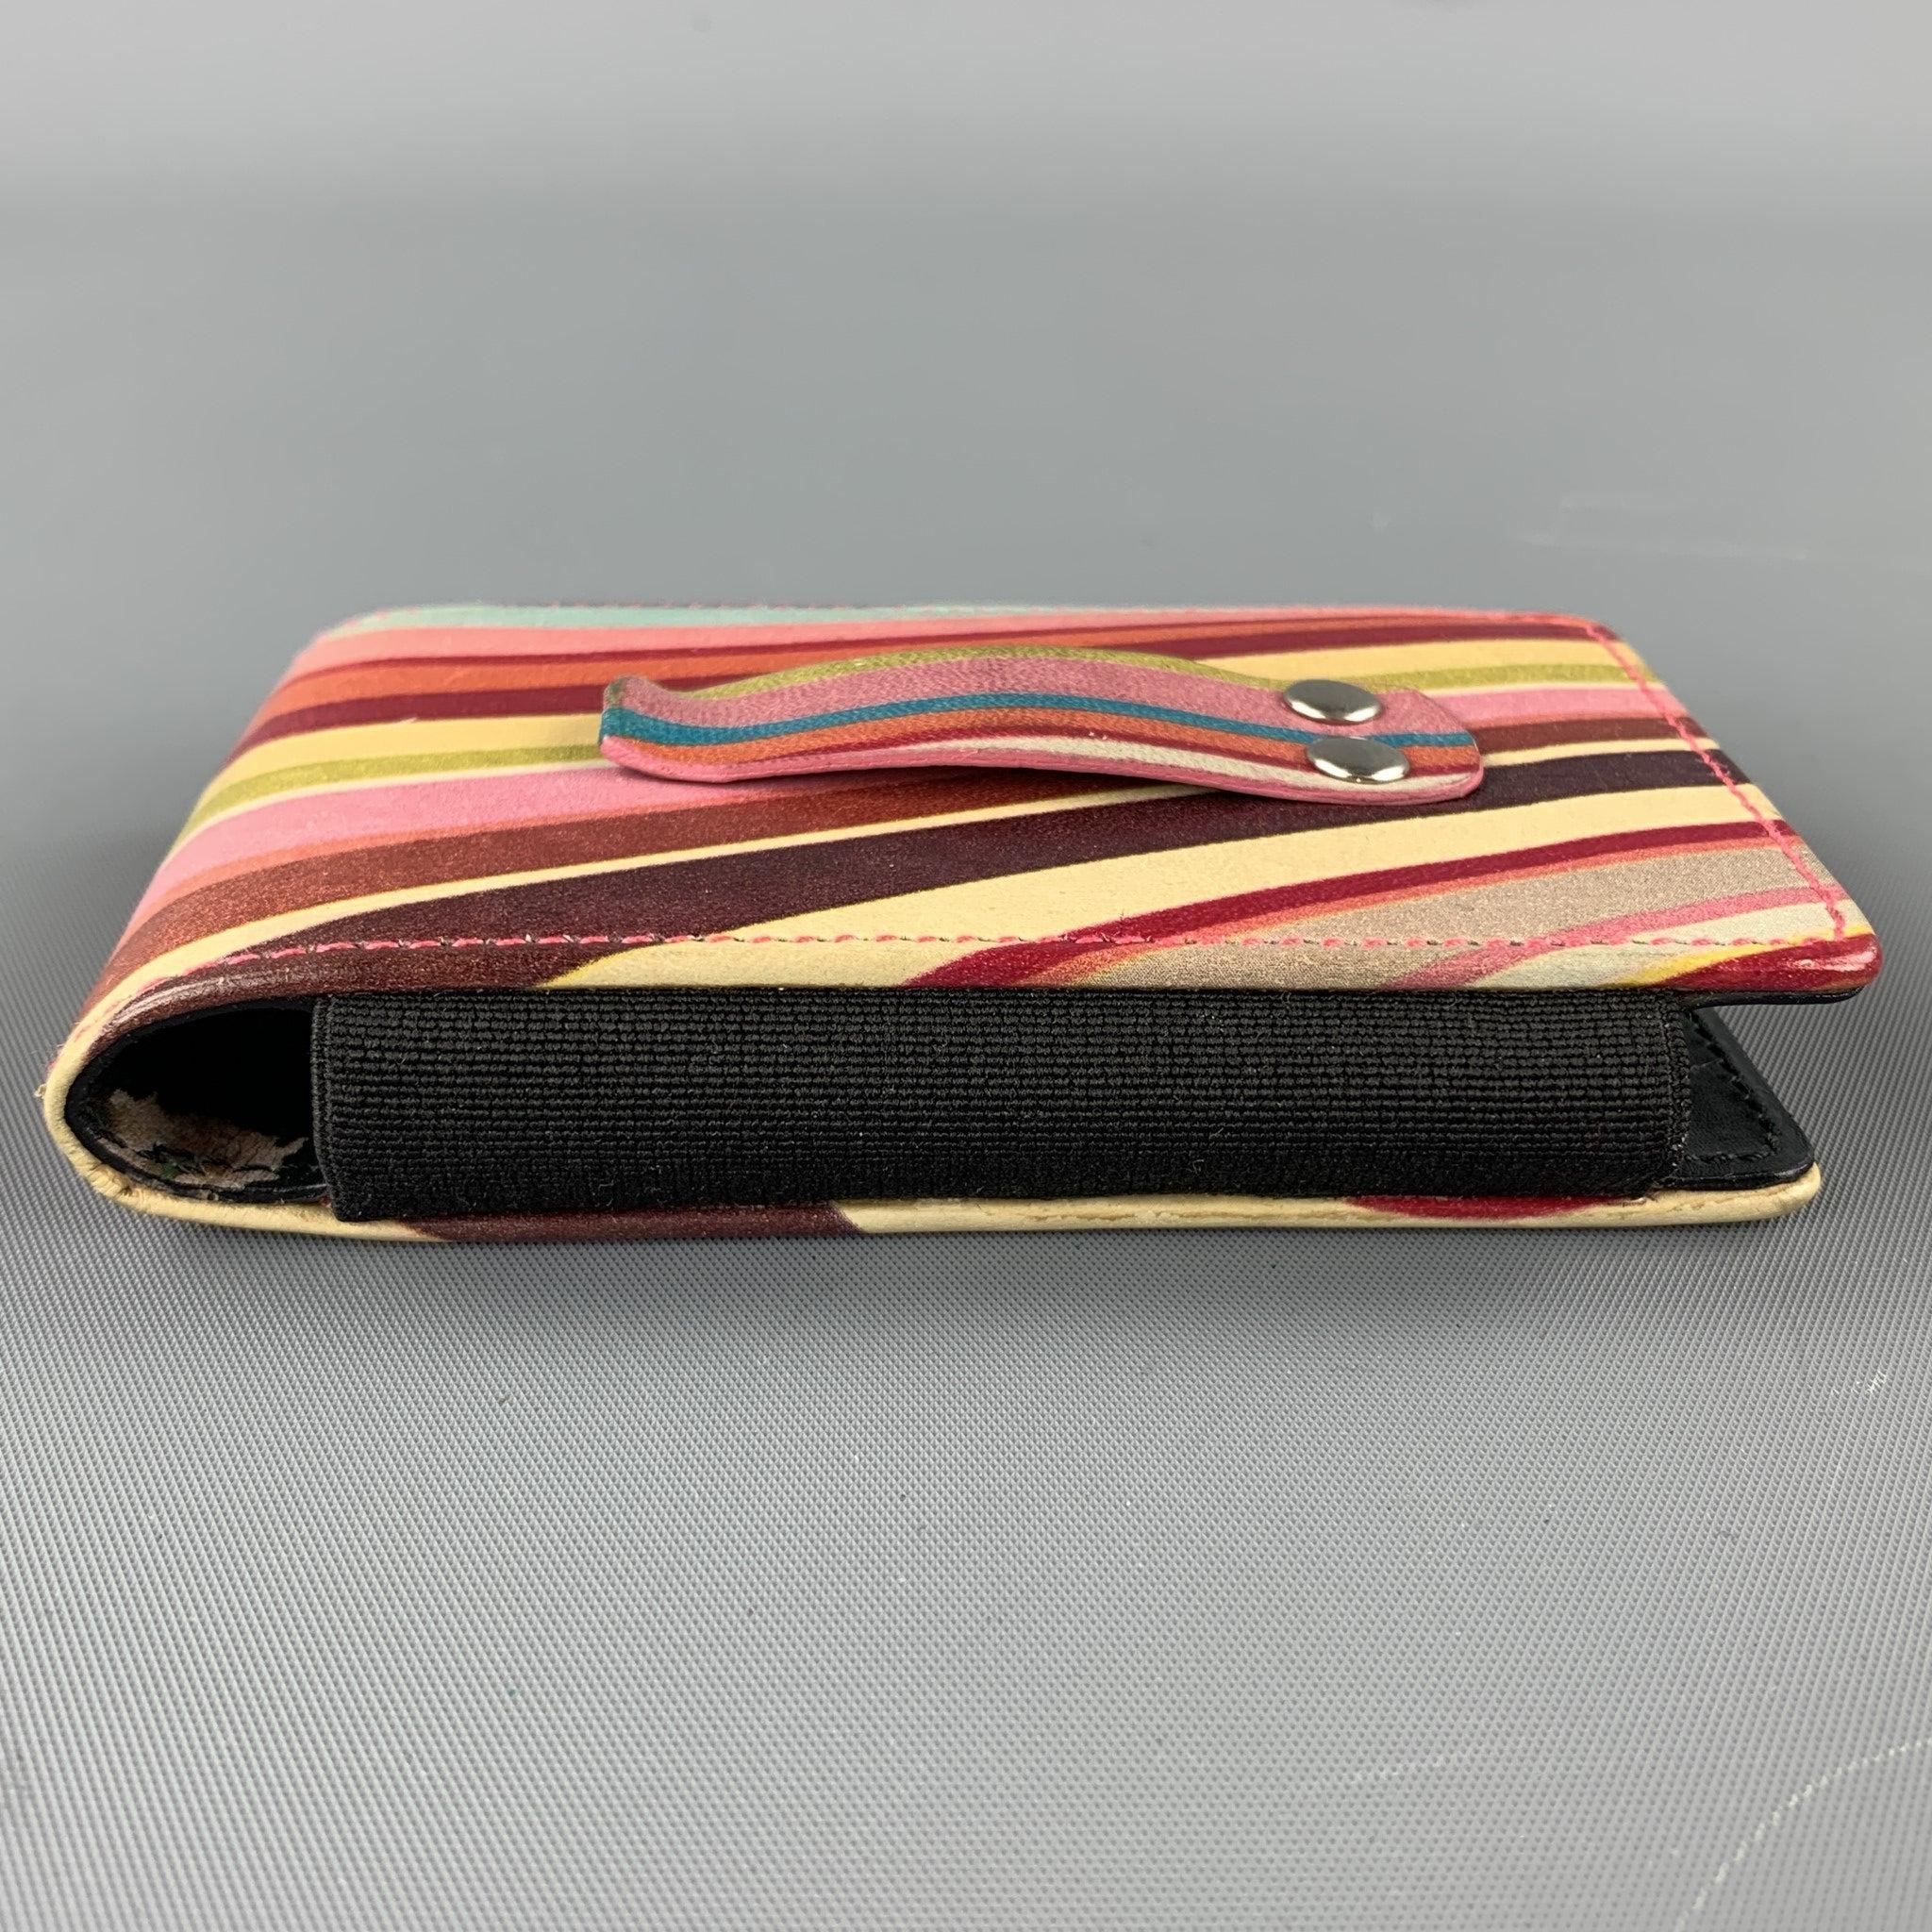 PAUL SMITH Multi-Color Leather Phone Case In Good Condition For Sale In San Francisco, CA